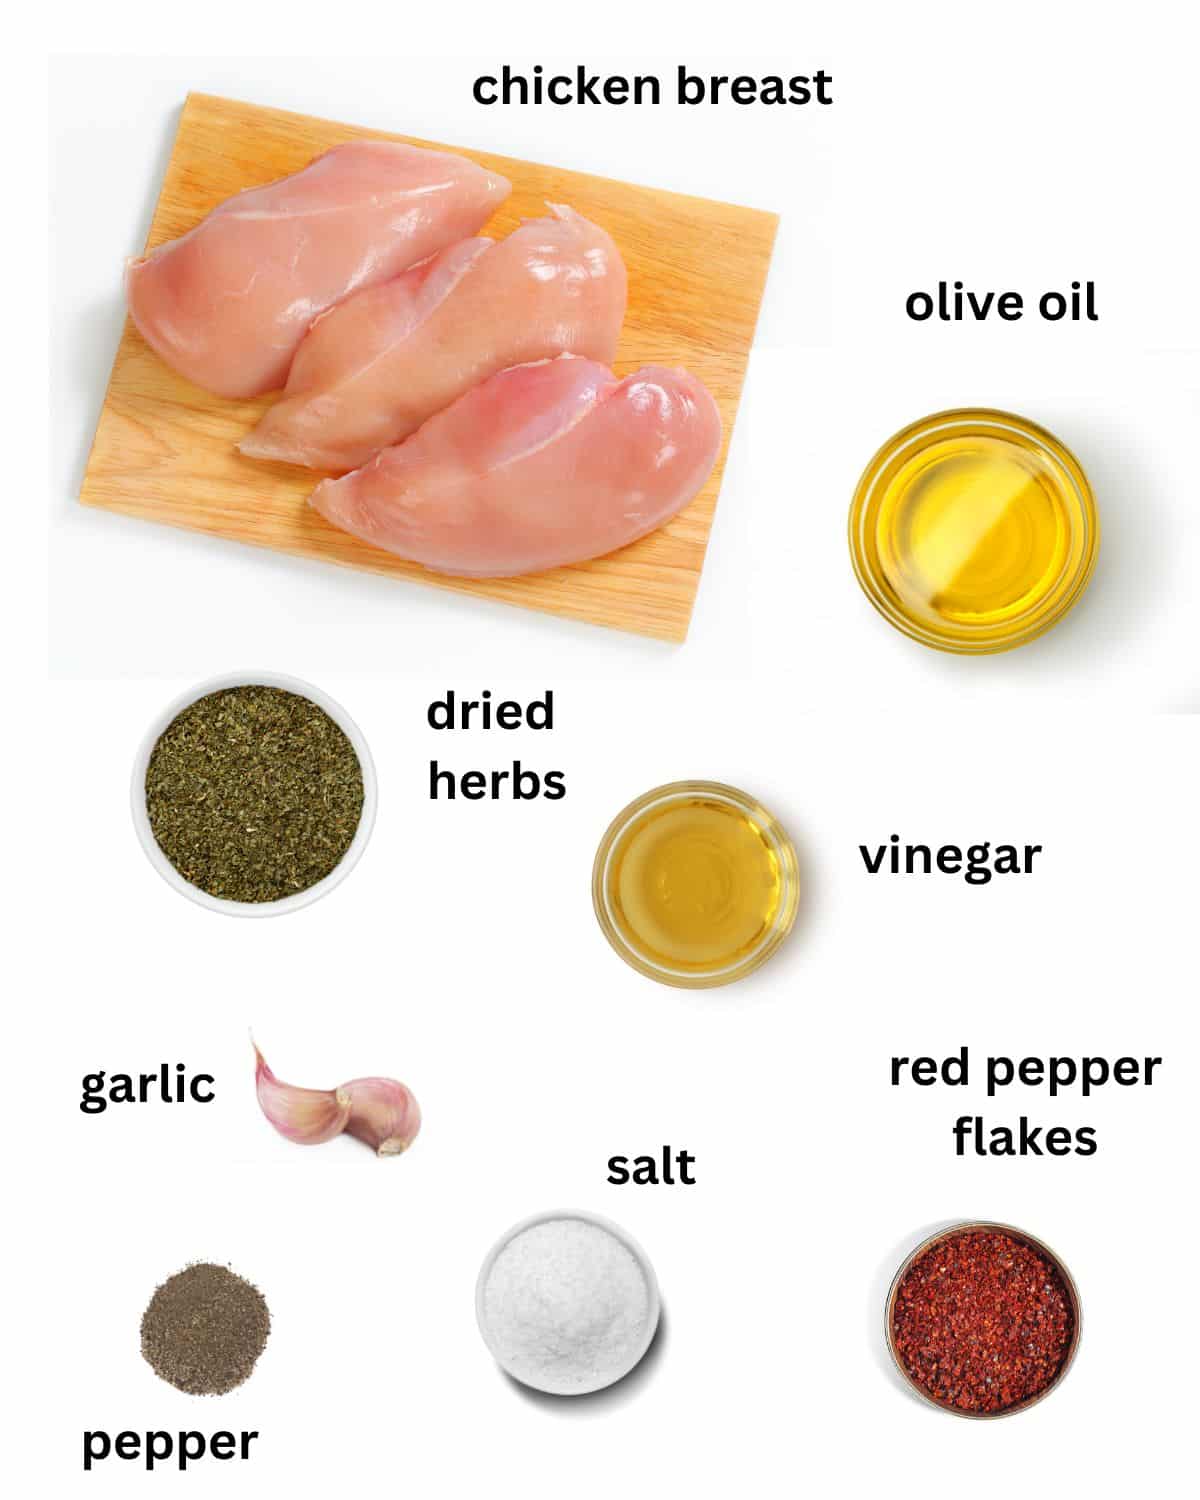 listed ingredients for marinating and pan frying chicken brreast.